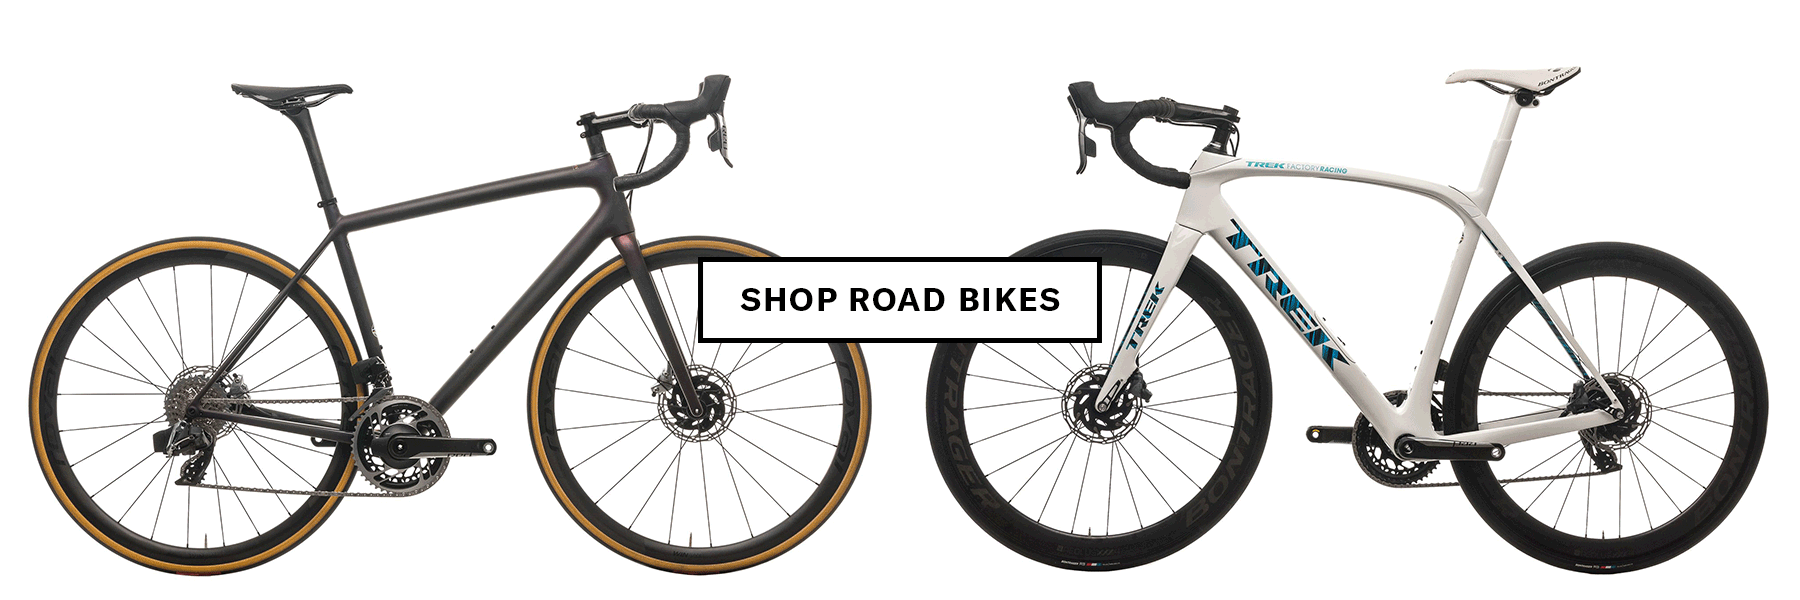 Used Bike Buyers Guide Best Tips, Terms, Considerations for Pre-Owned Road Bikes The Pros Closet